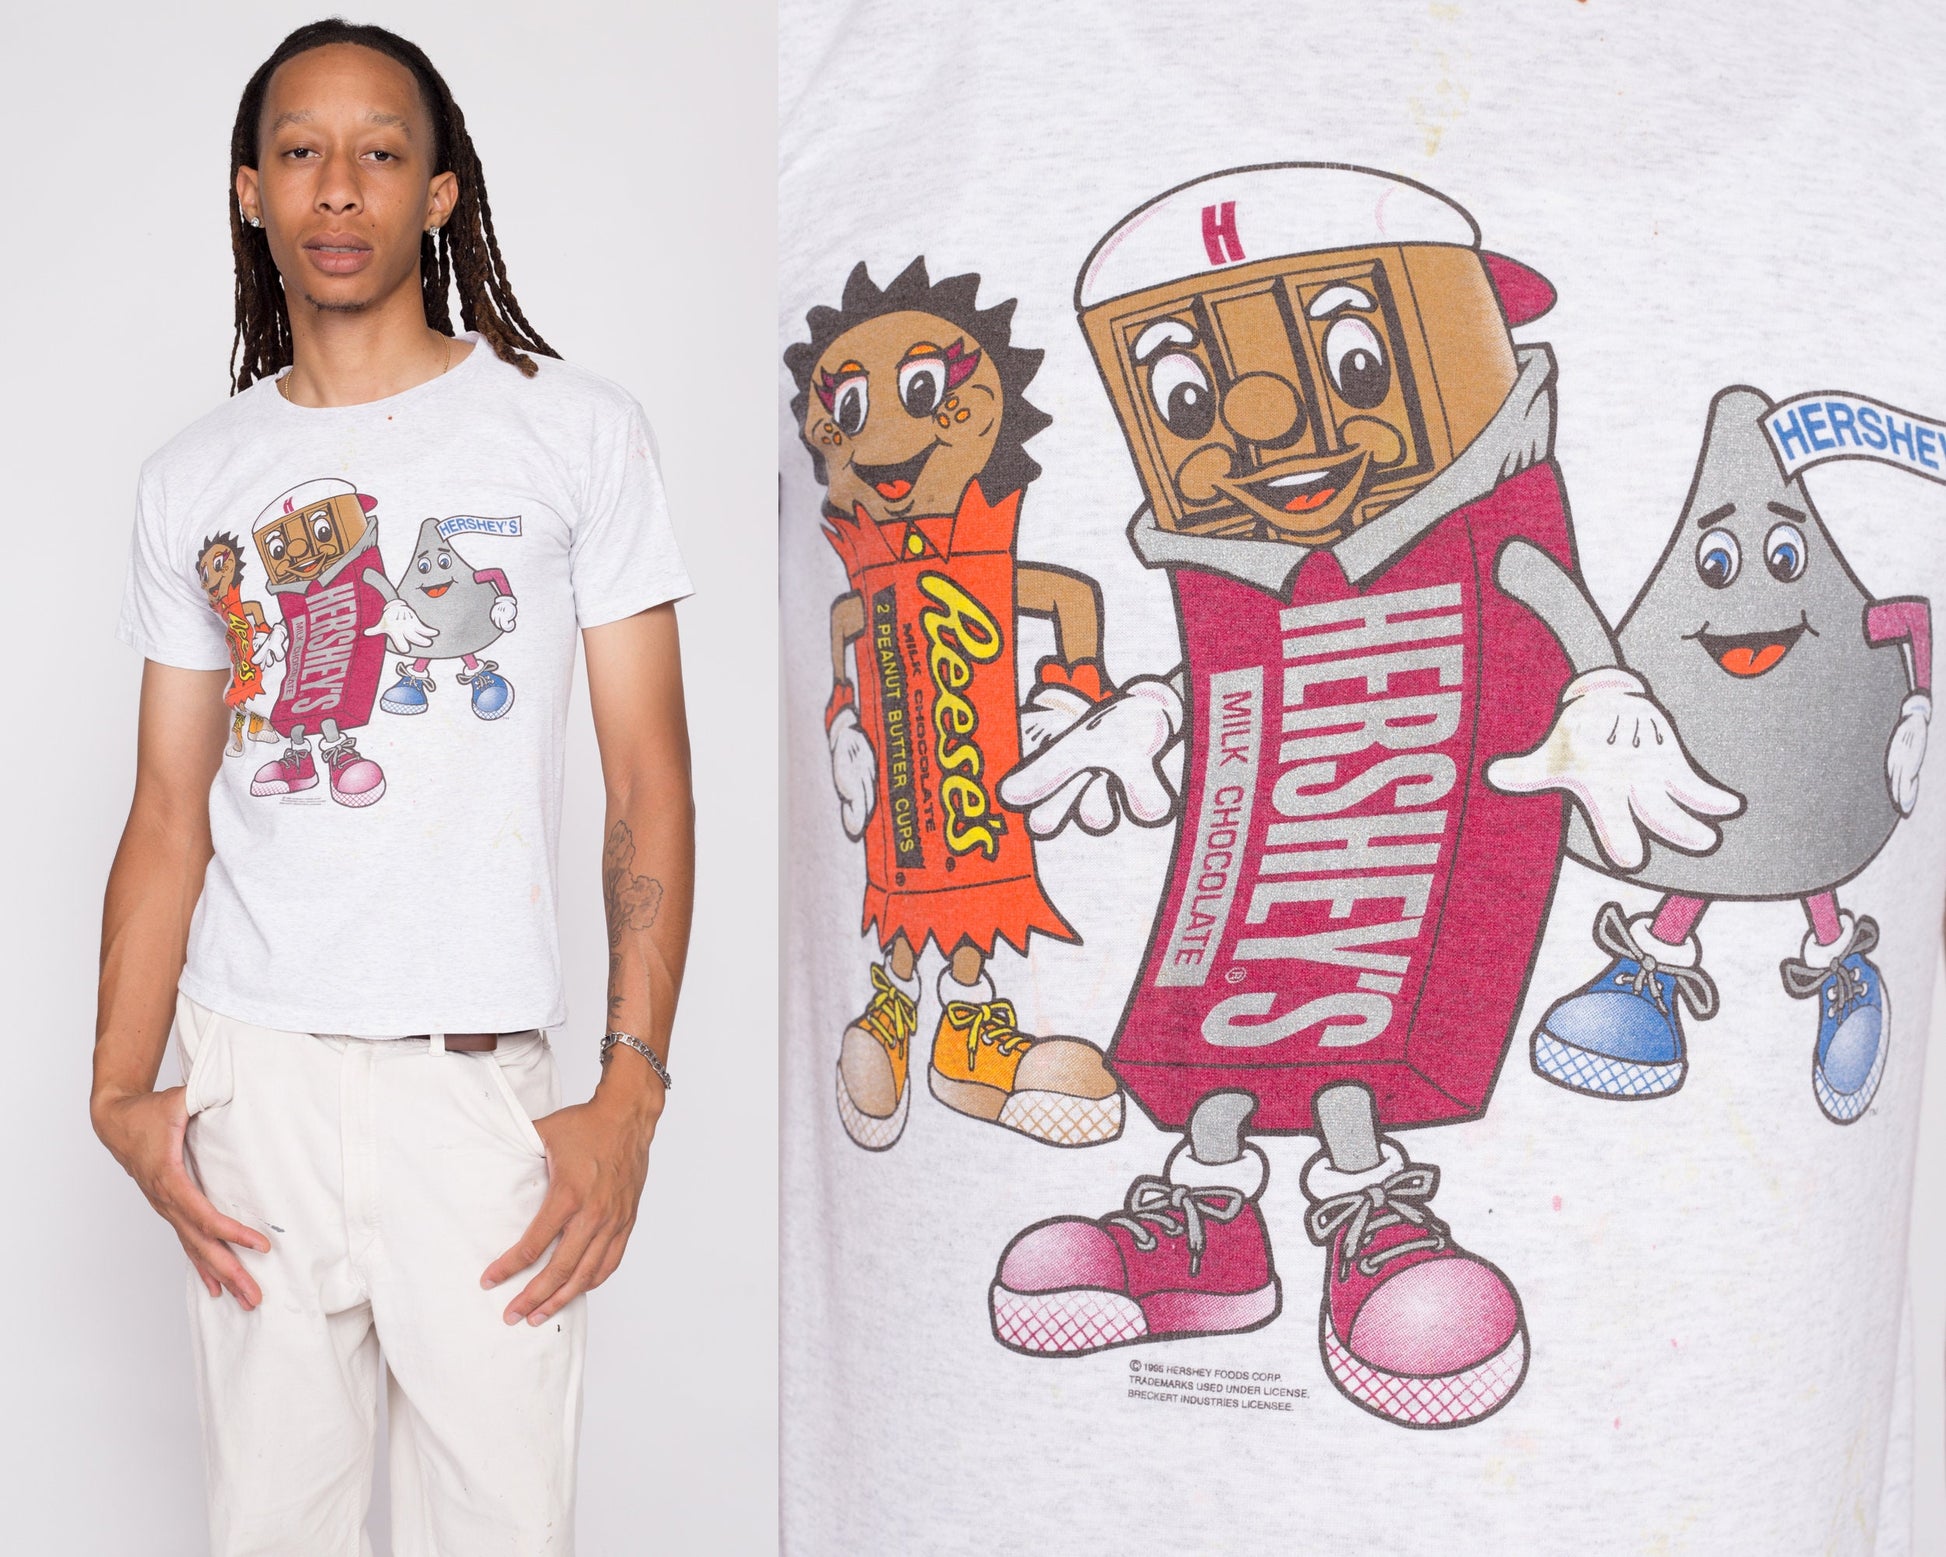 90s Hershey's Candy Bar Streetwear T Shirt - Men's Small Short | Vintage Reese's Cup Chocolate Bar Graphic Brand Tee